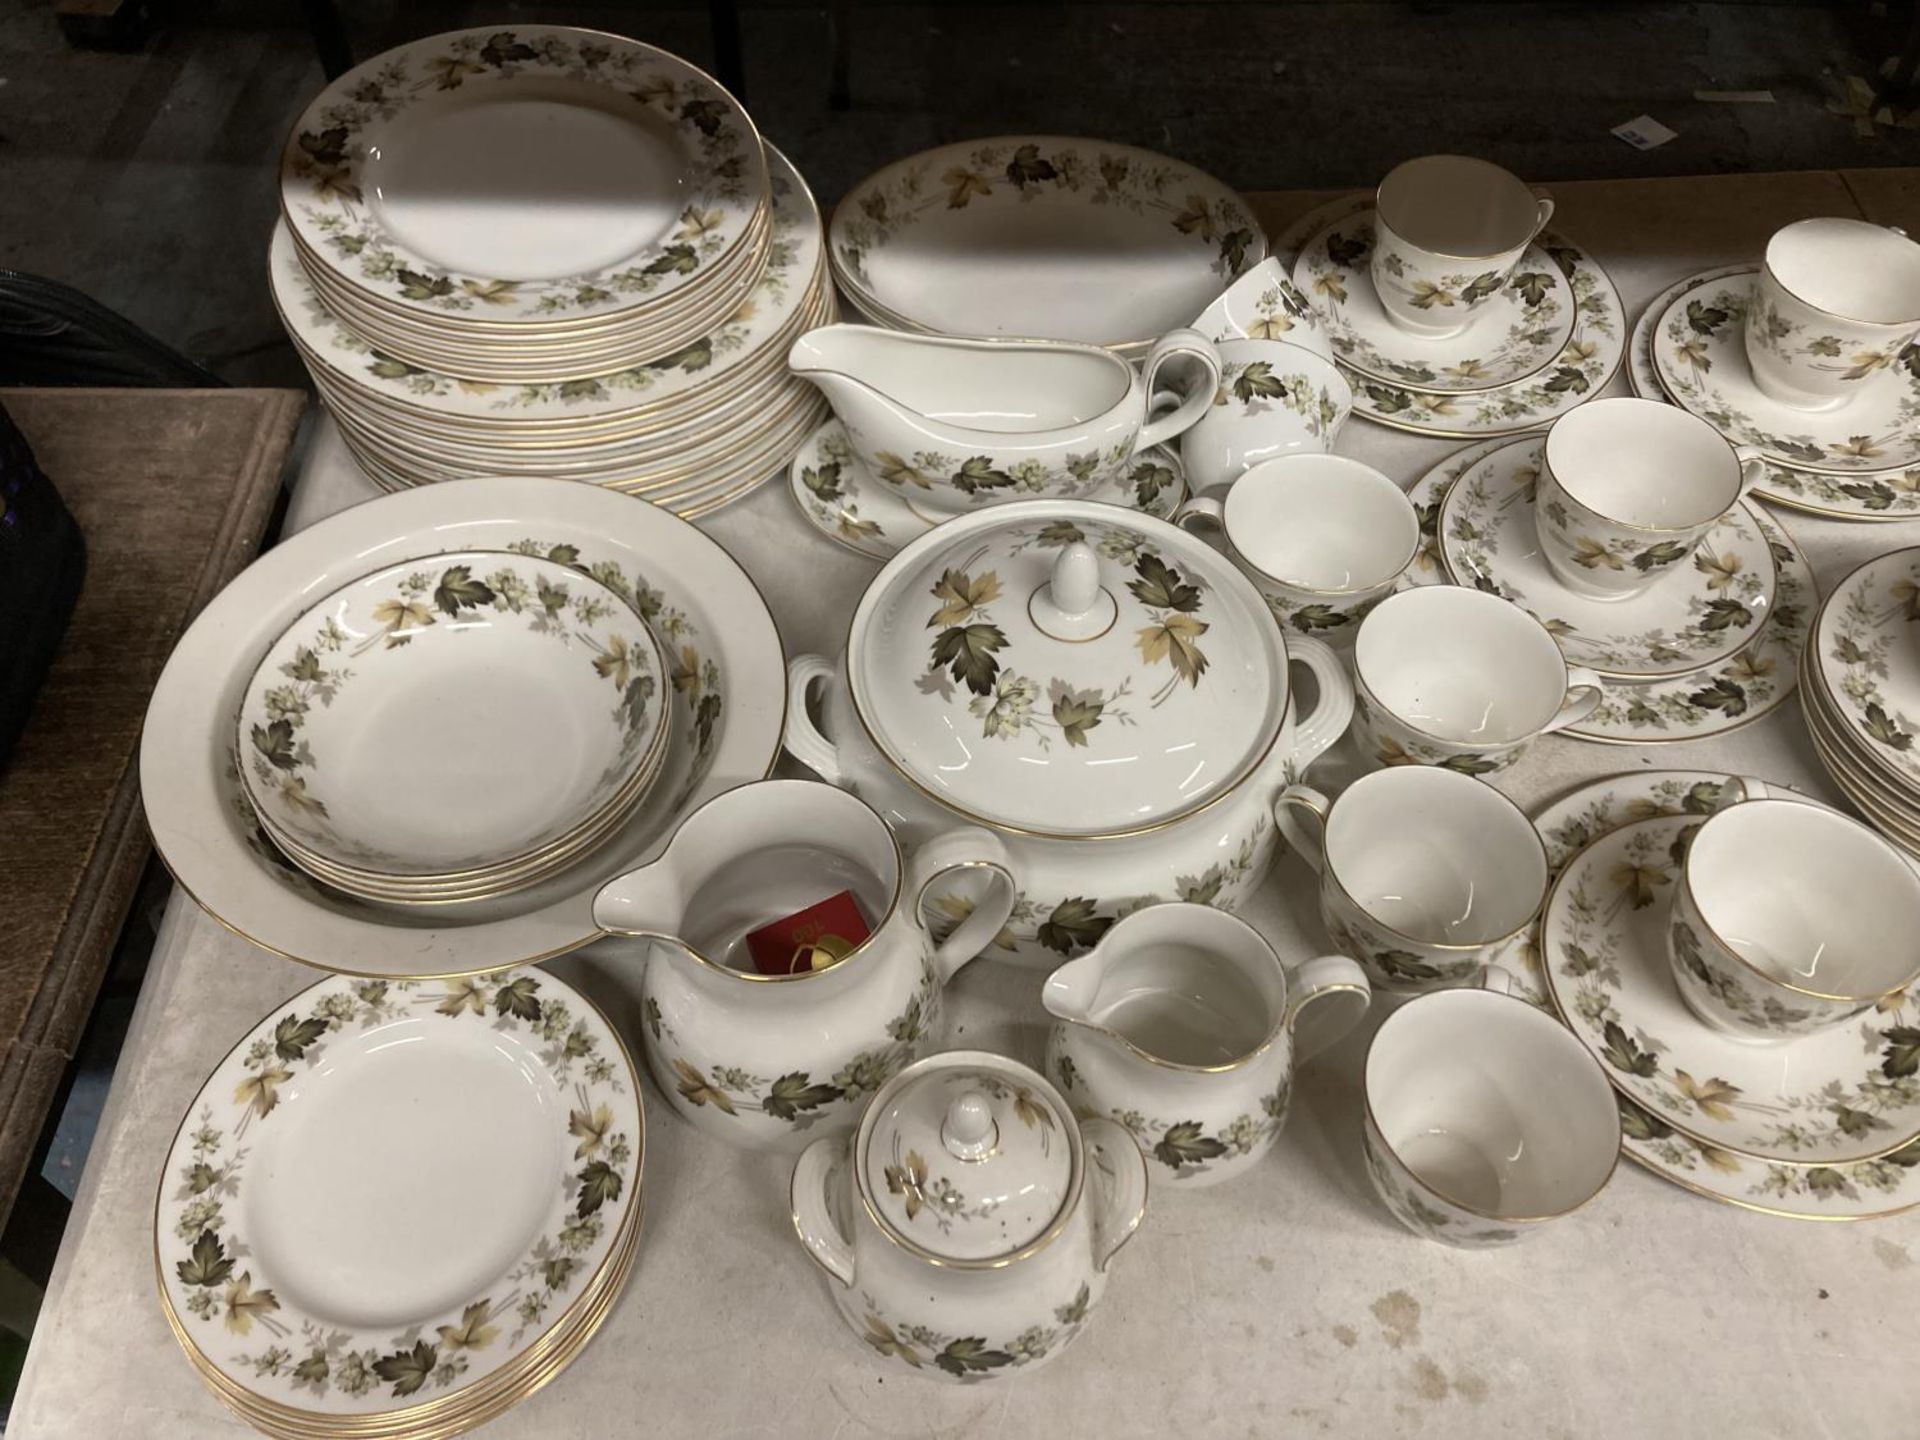 A ROYAL DOULTON 'LARCHMONT' DINNER SERVICE, TO INCLUDE VARIOUS SIZES OF PLATES, A SERVING TUREEN AND - Image 2 of 5